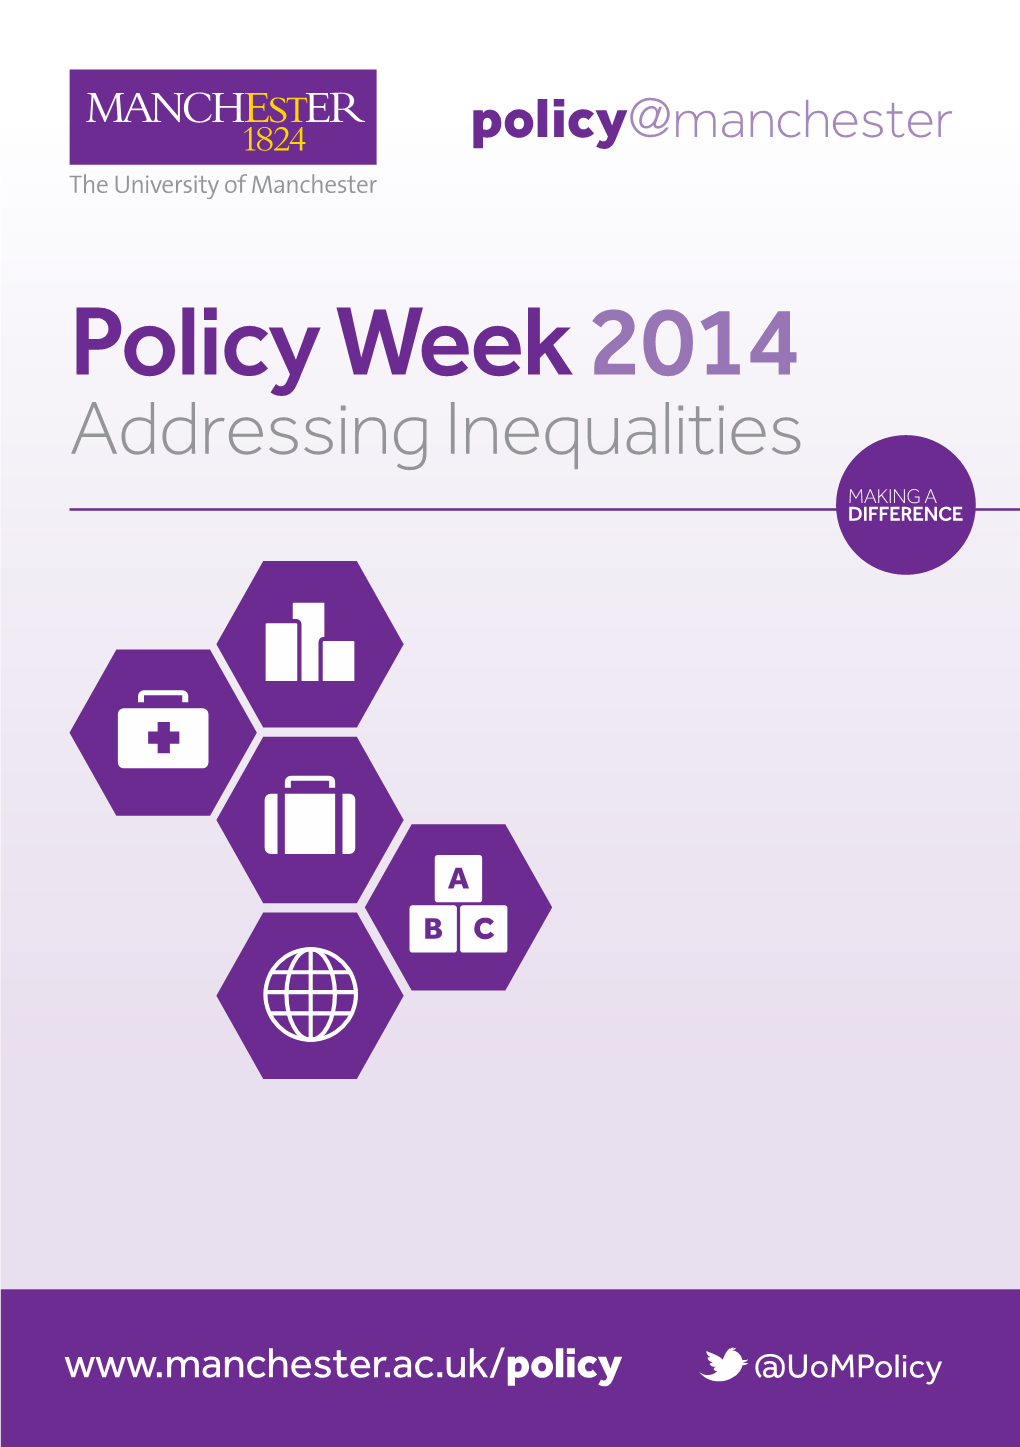 Policy Week 2014 Addressing Inequalities MAKING a DIFFERENCE